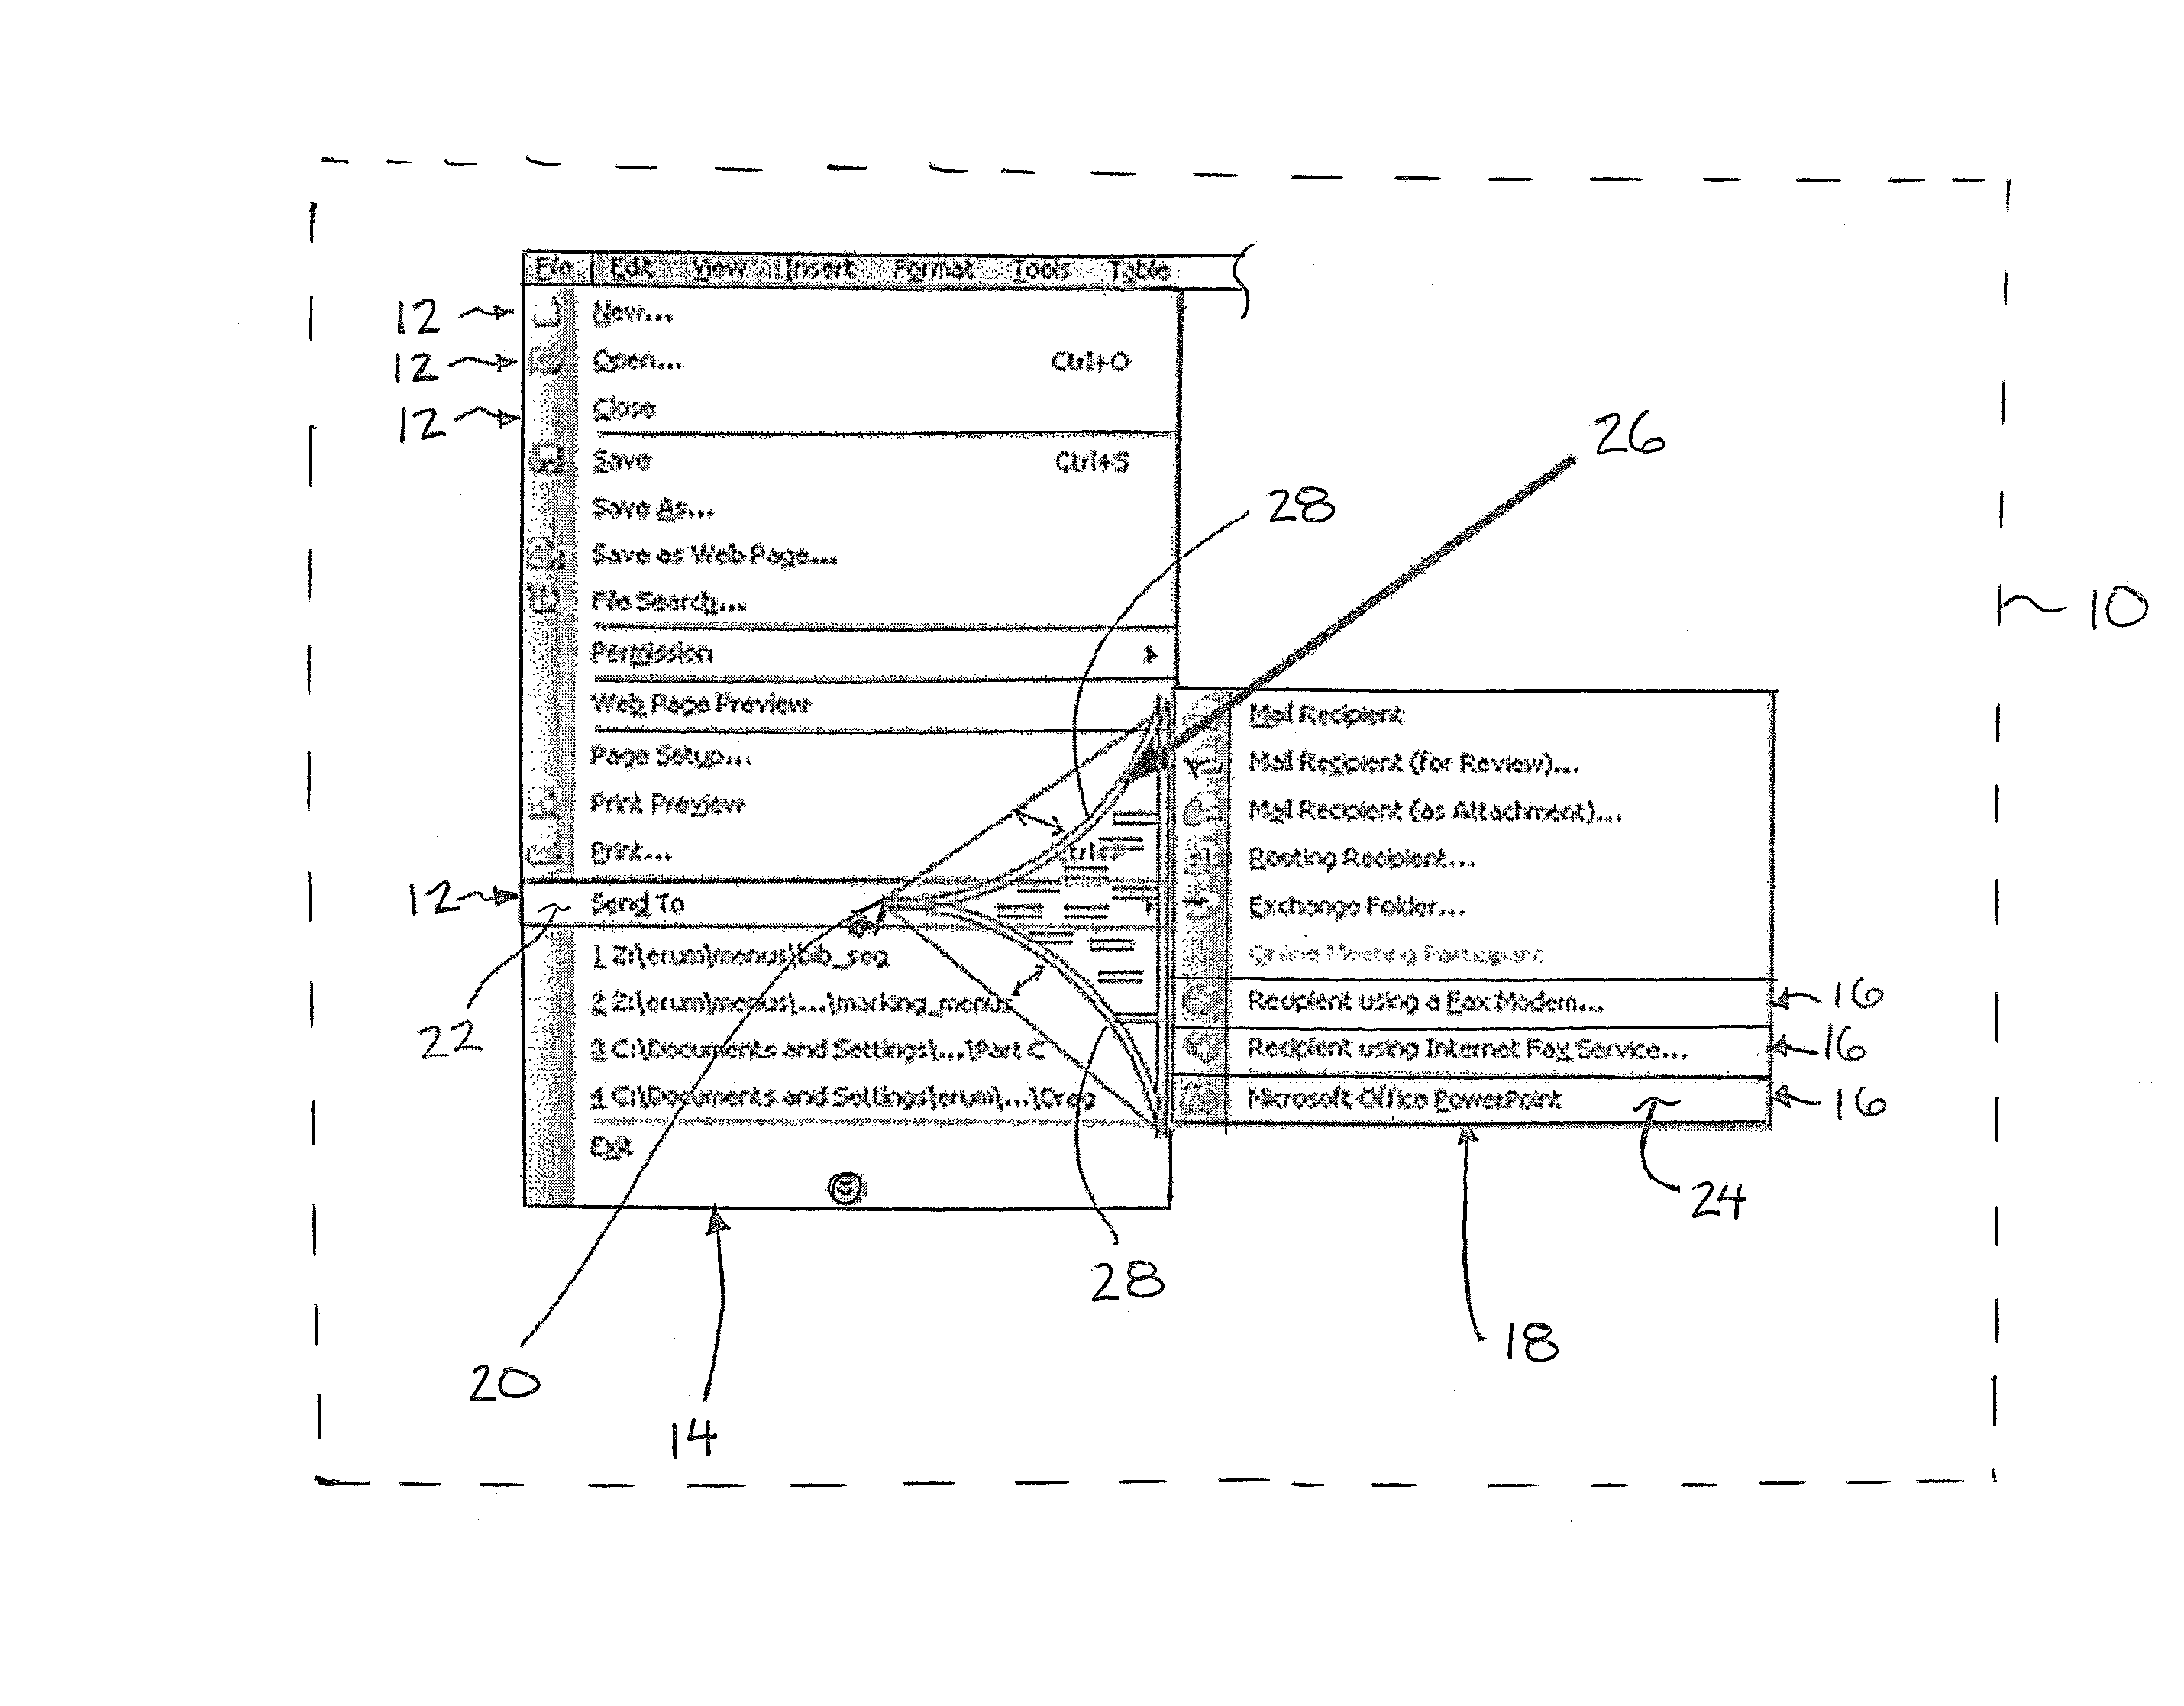 Selectable parent and submenu object display method with varied activation area shape